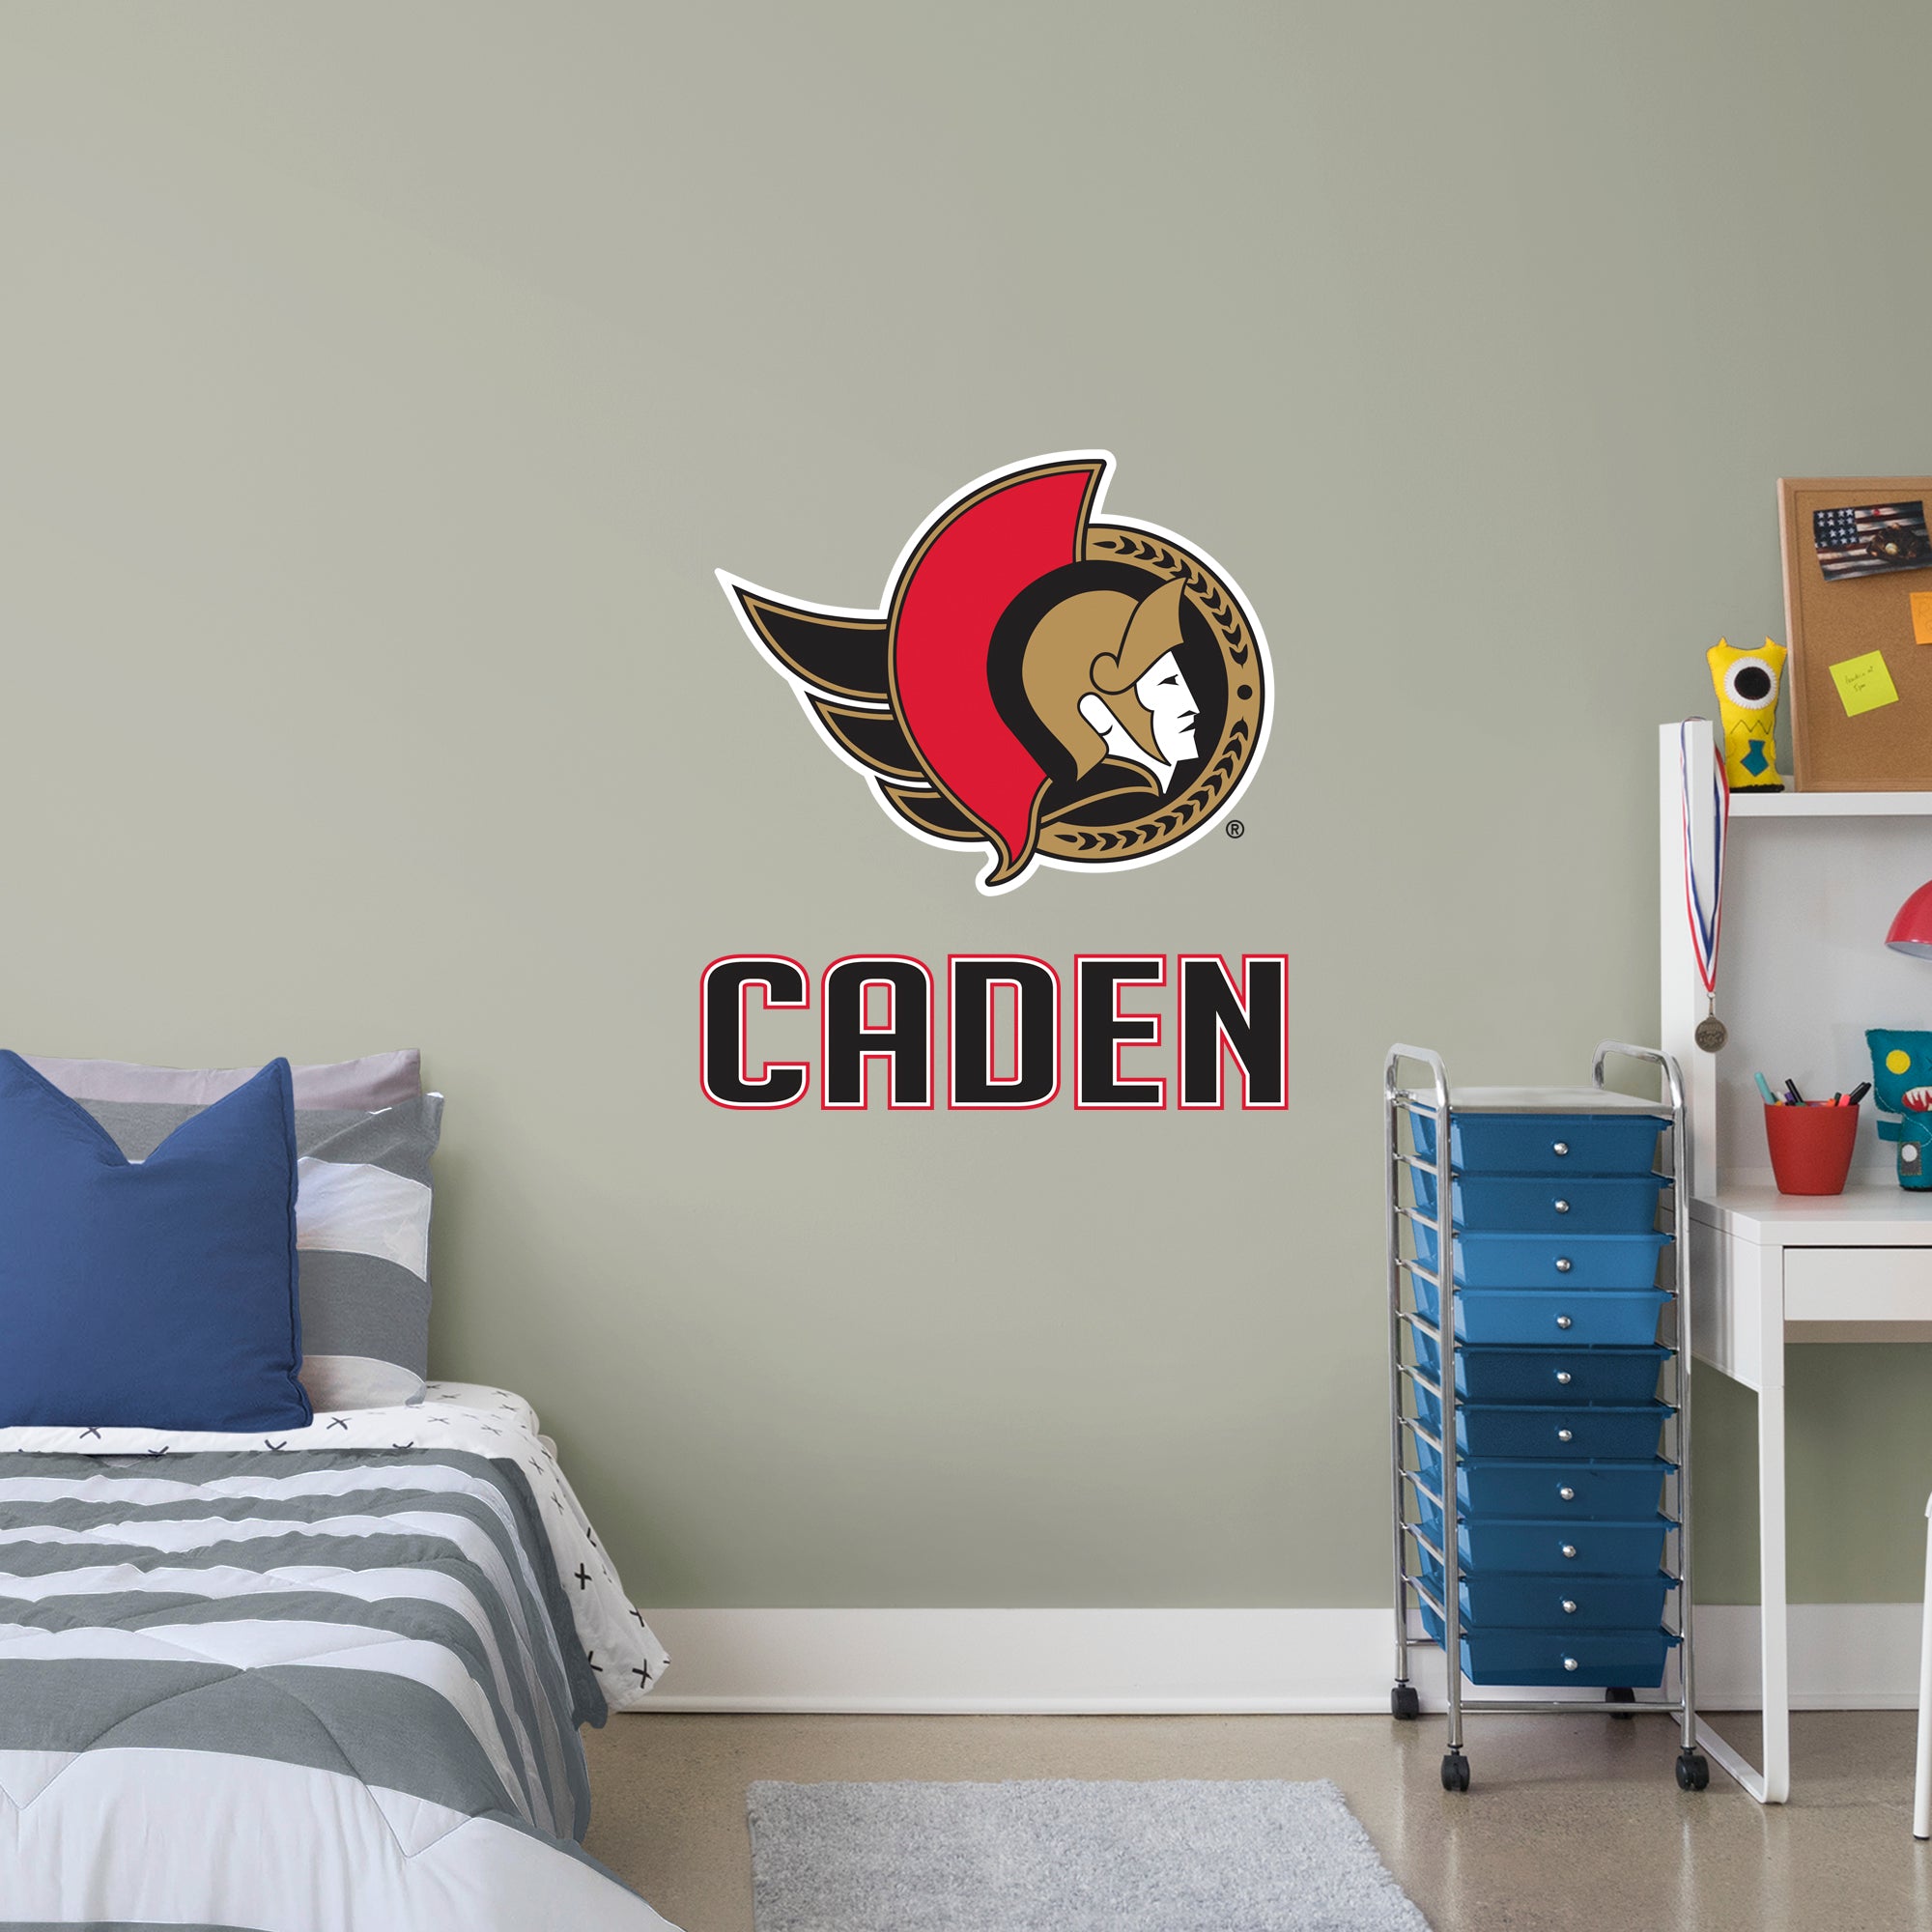 Ottawa Senators 2020 Stacked Personalized Name Black Text PREMASK - Officially Licensed NHL Removable Wall Decal Giant Transfer